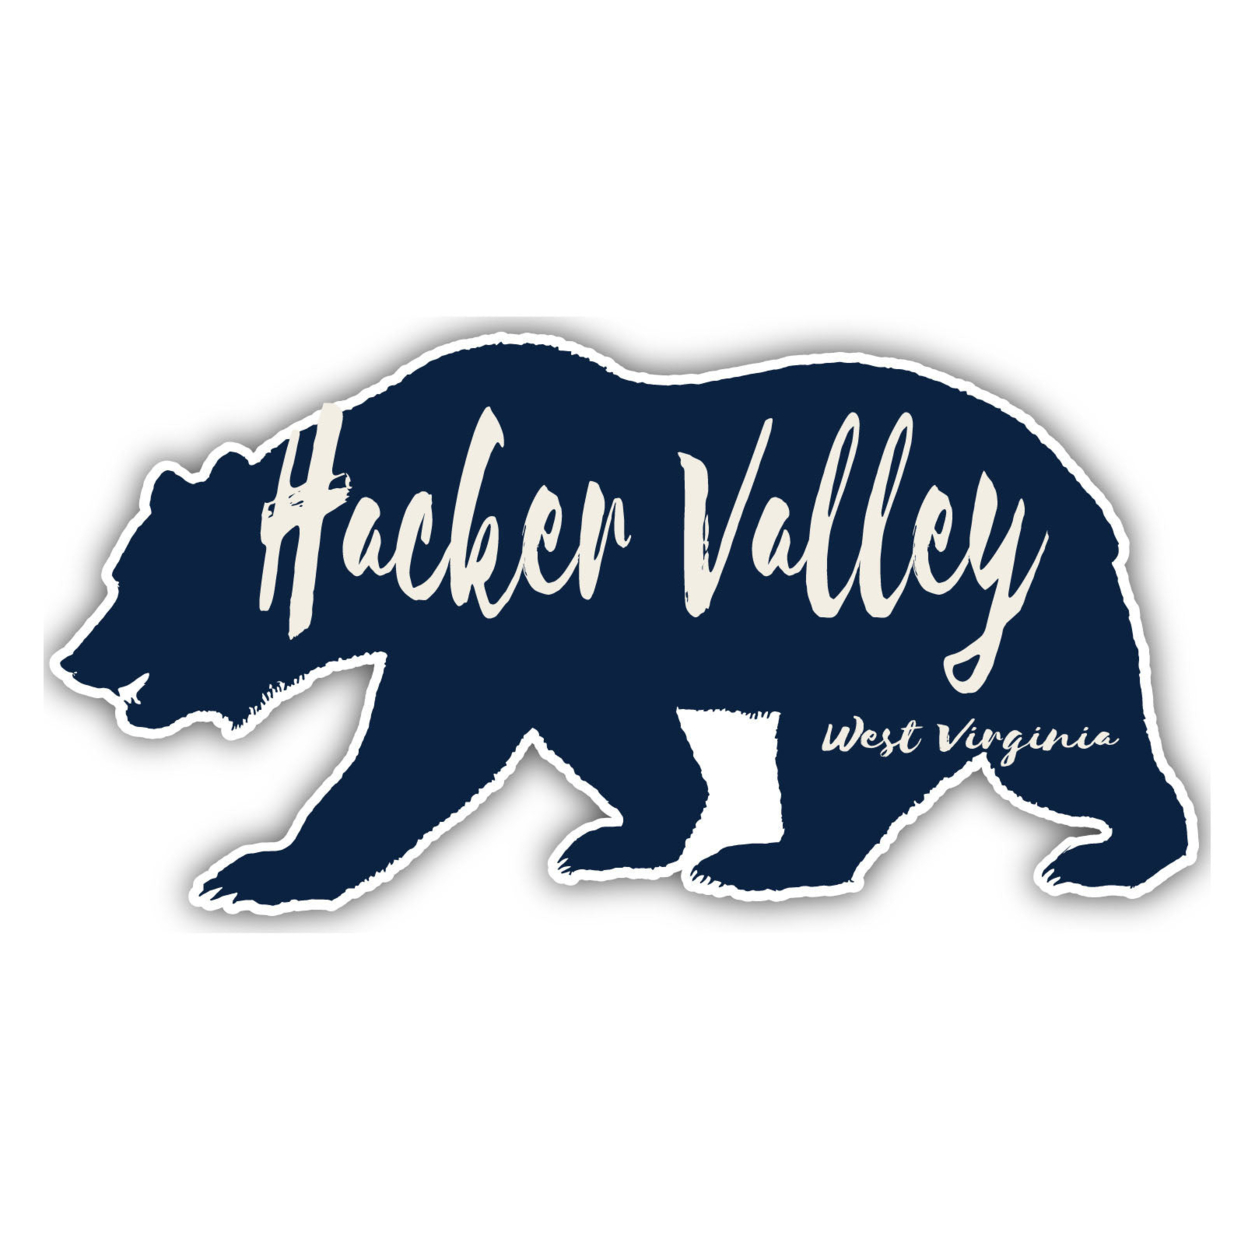 Hacker Valley West Virginia Souvenir Decorative Stickers (Choose Theme And Size) - 4-Pack, 4-Inch, Bear